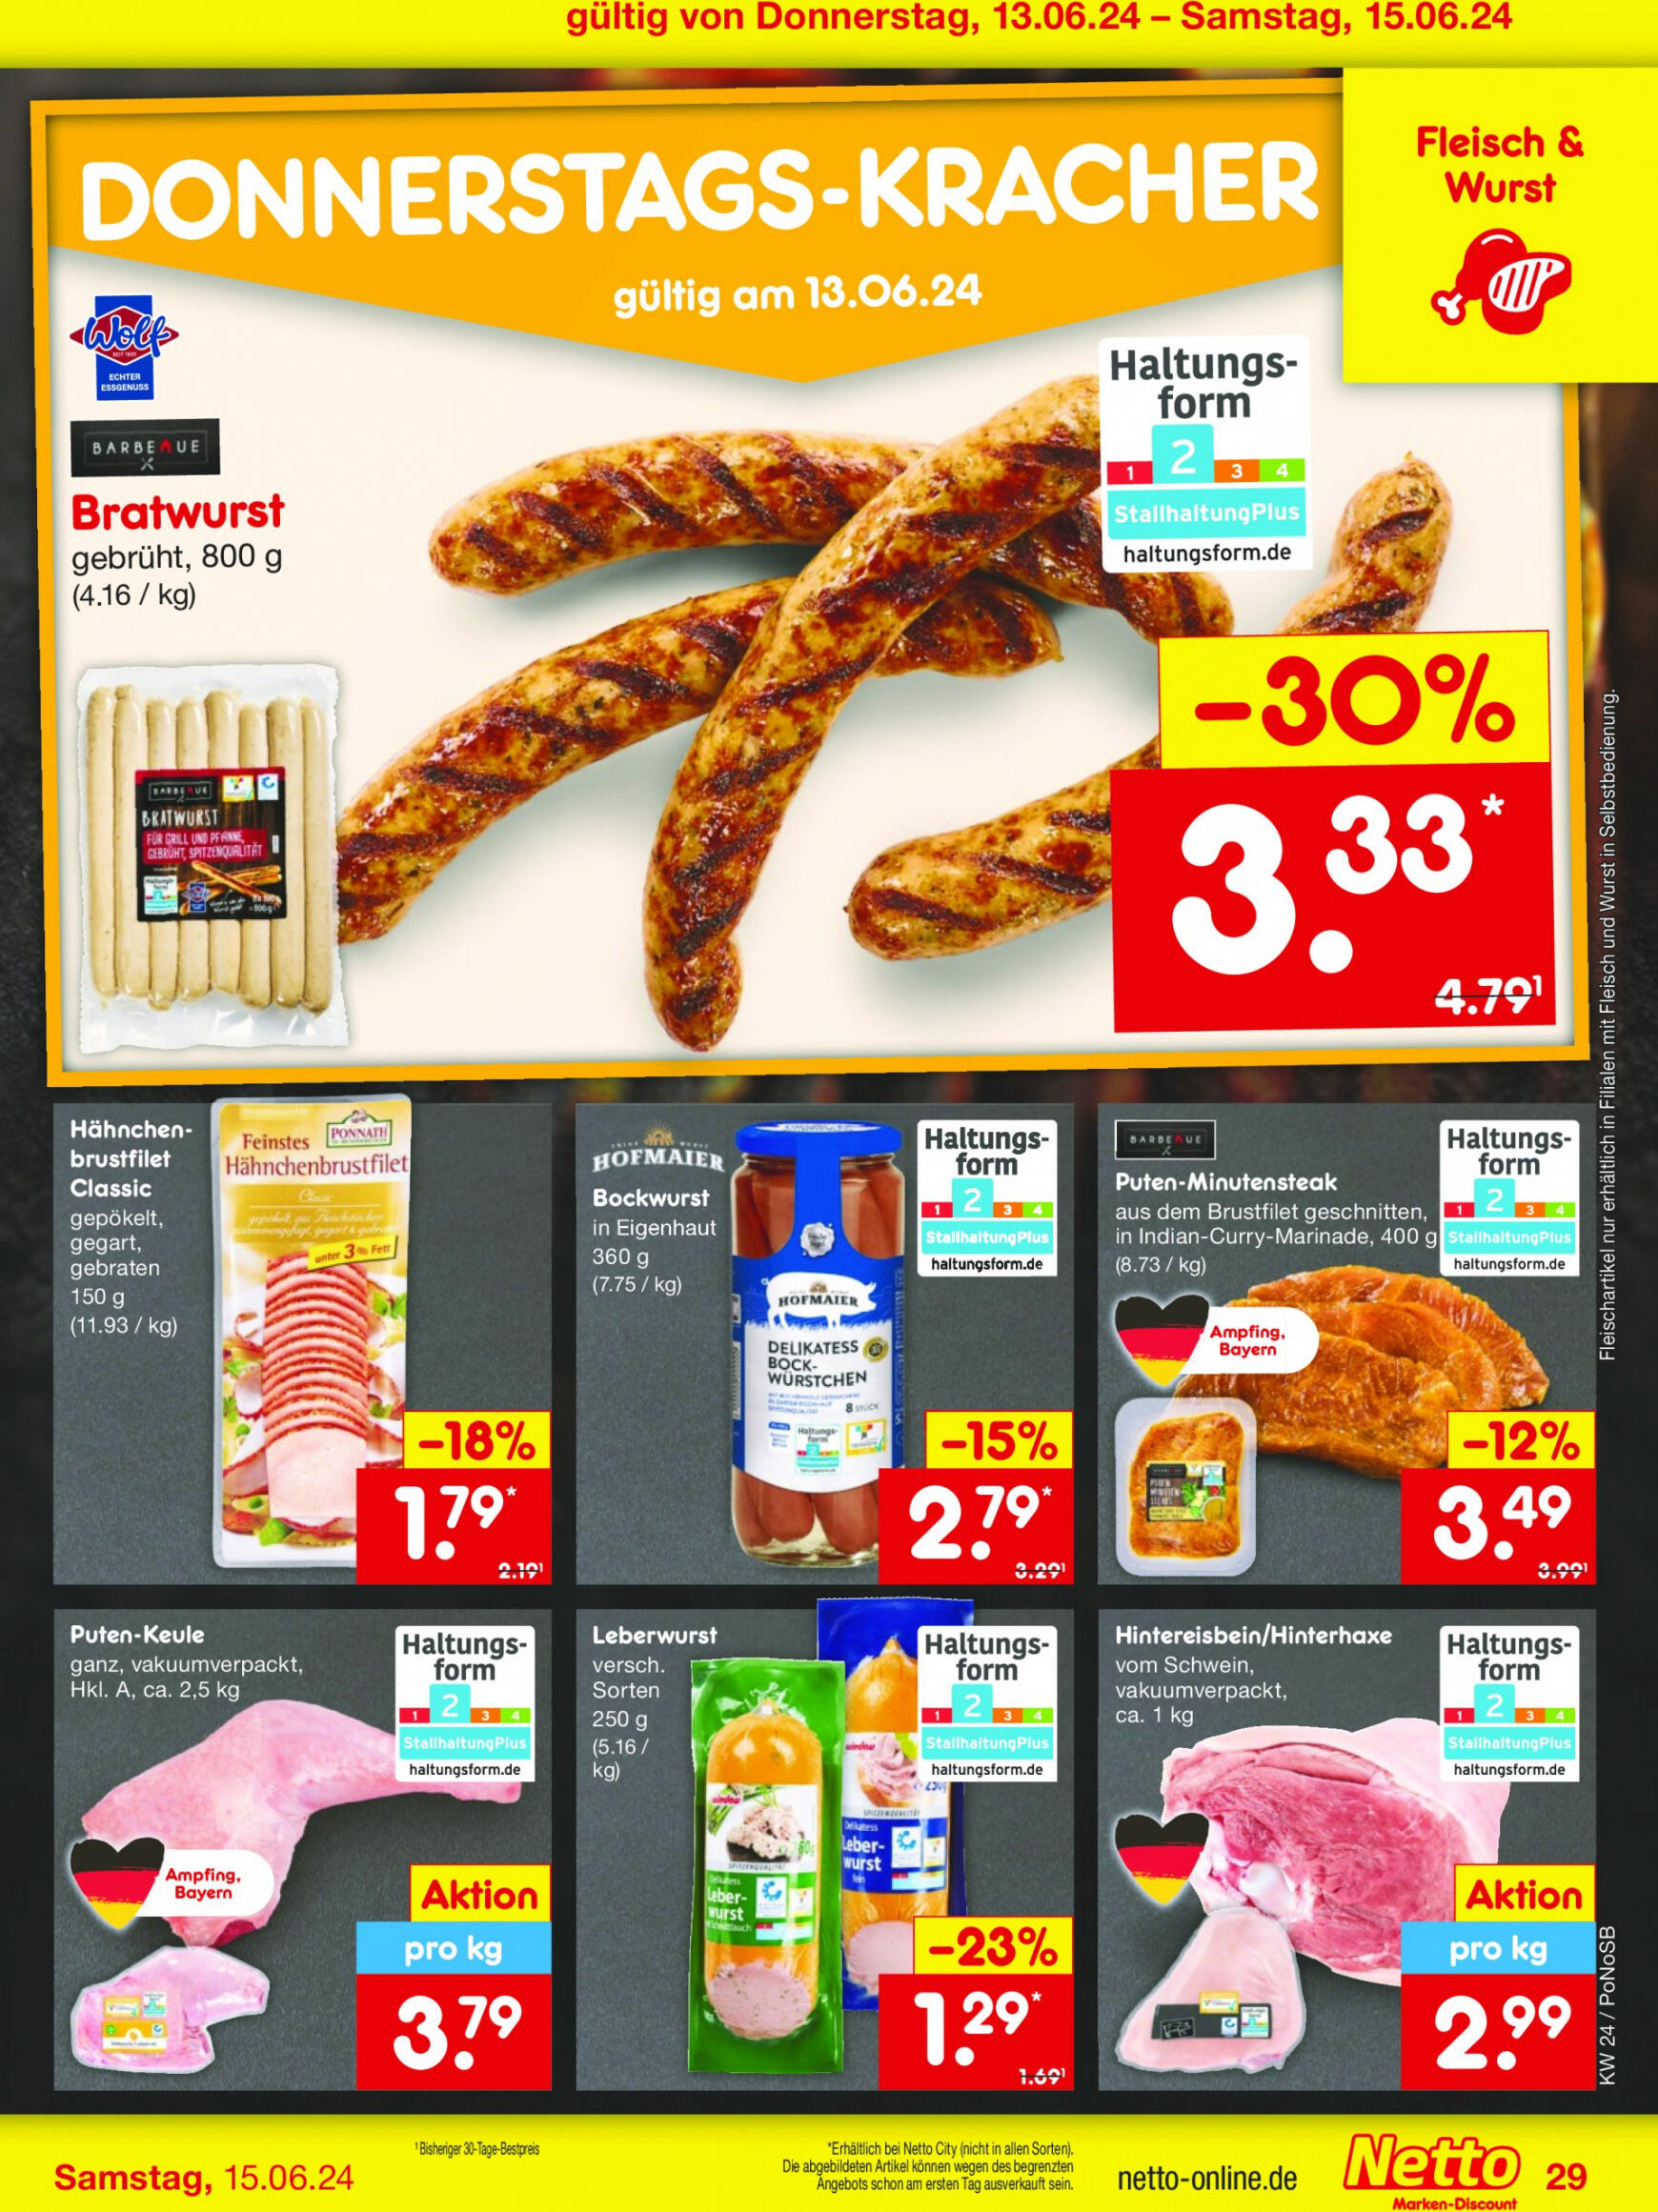 netto - Flyer Netto aktuell 10.06. - 15.06. - page: 45